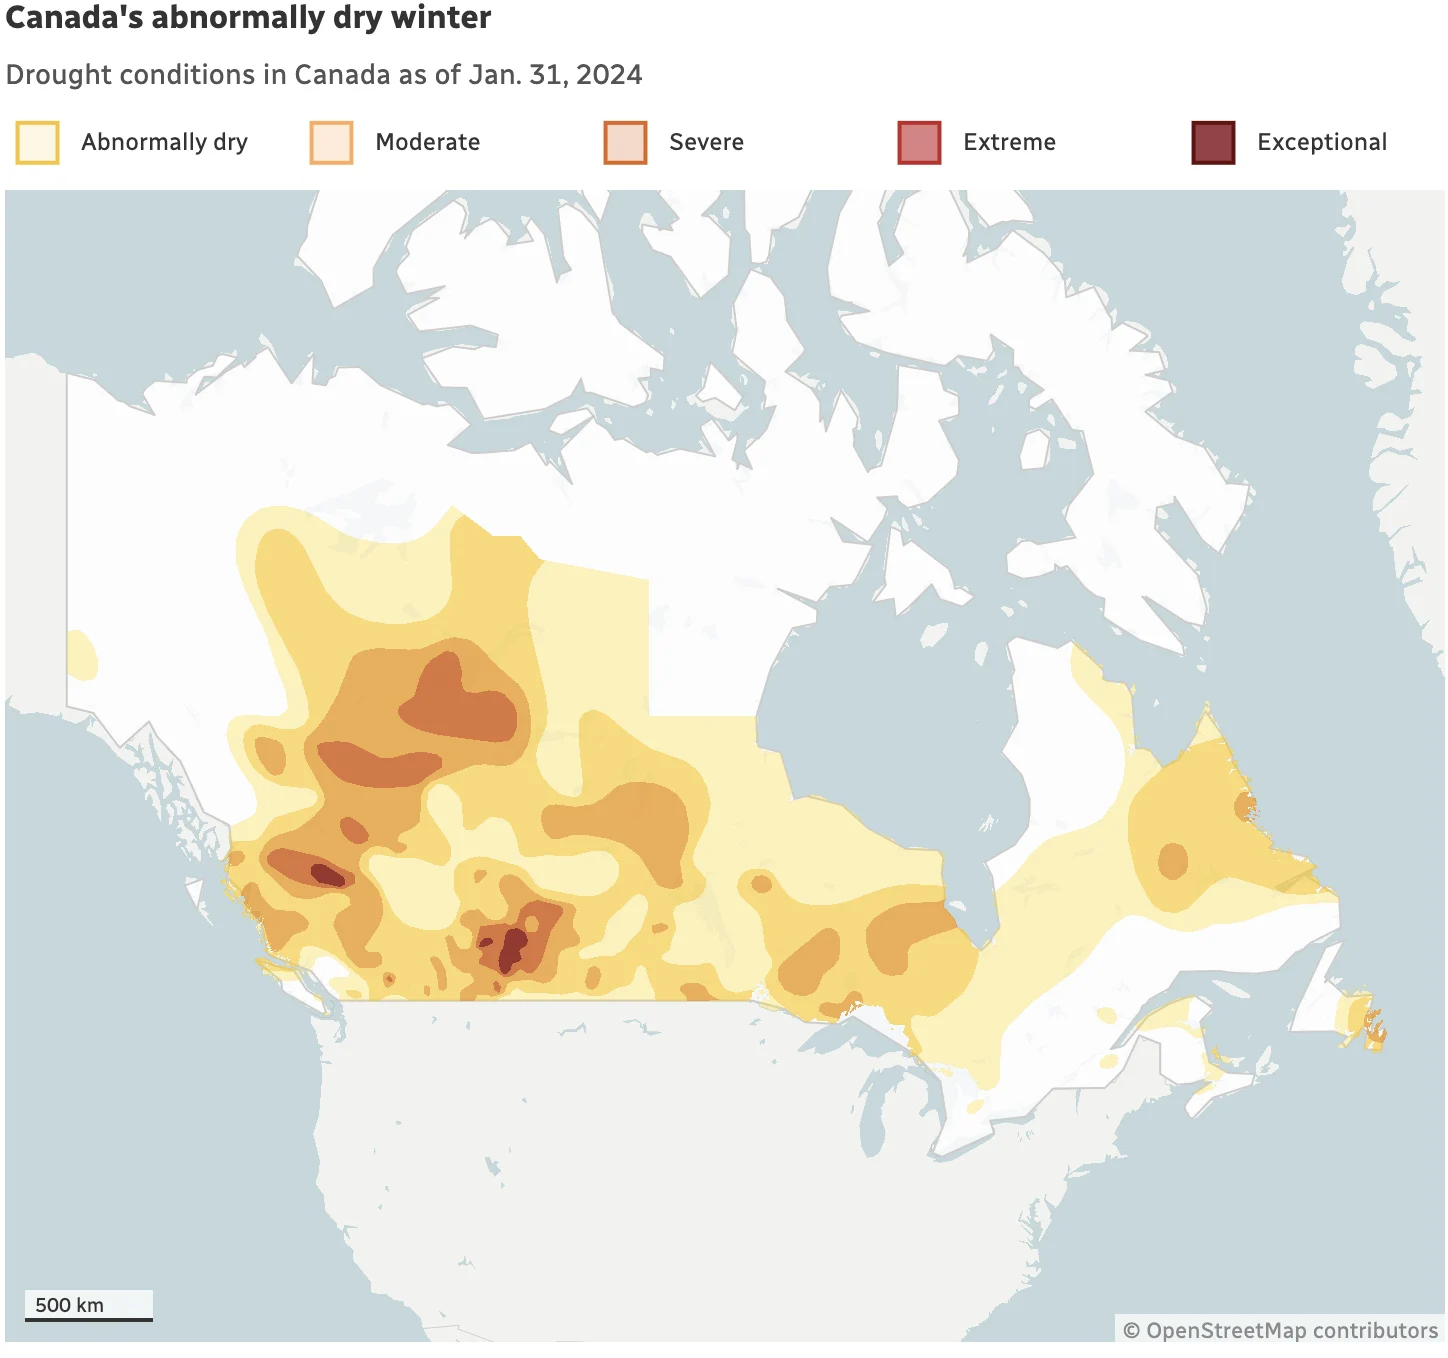 Feb. 20, 2024 - Canada's abnormally dry winter: Source: Agriculture and Agri-Food Canada (CBC)